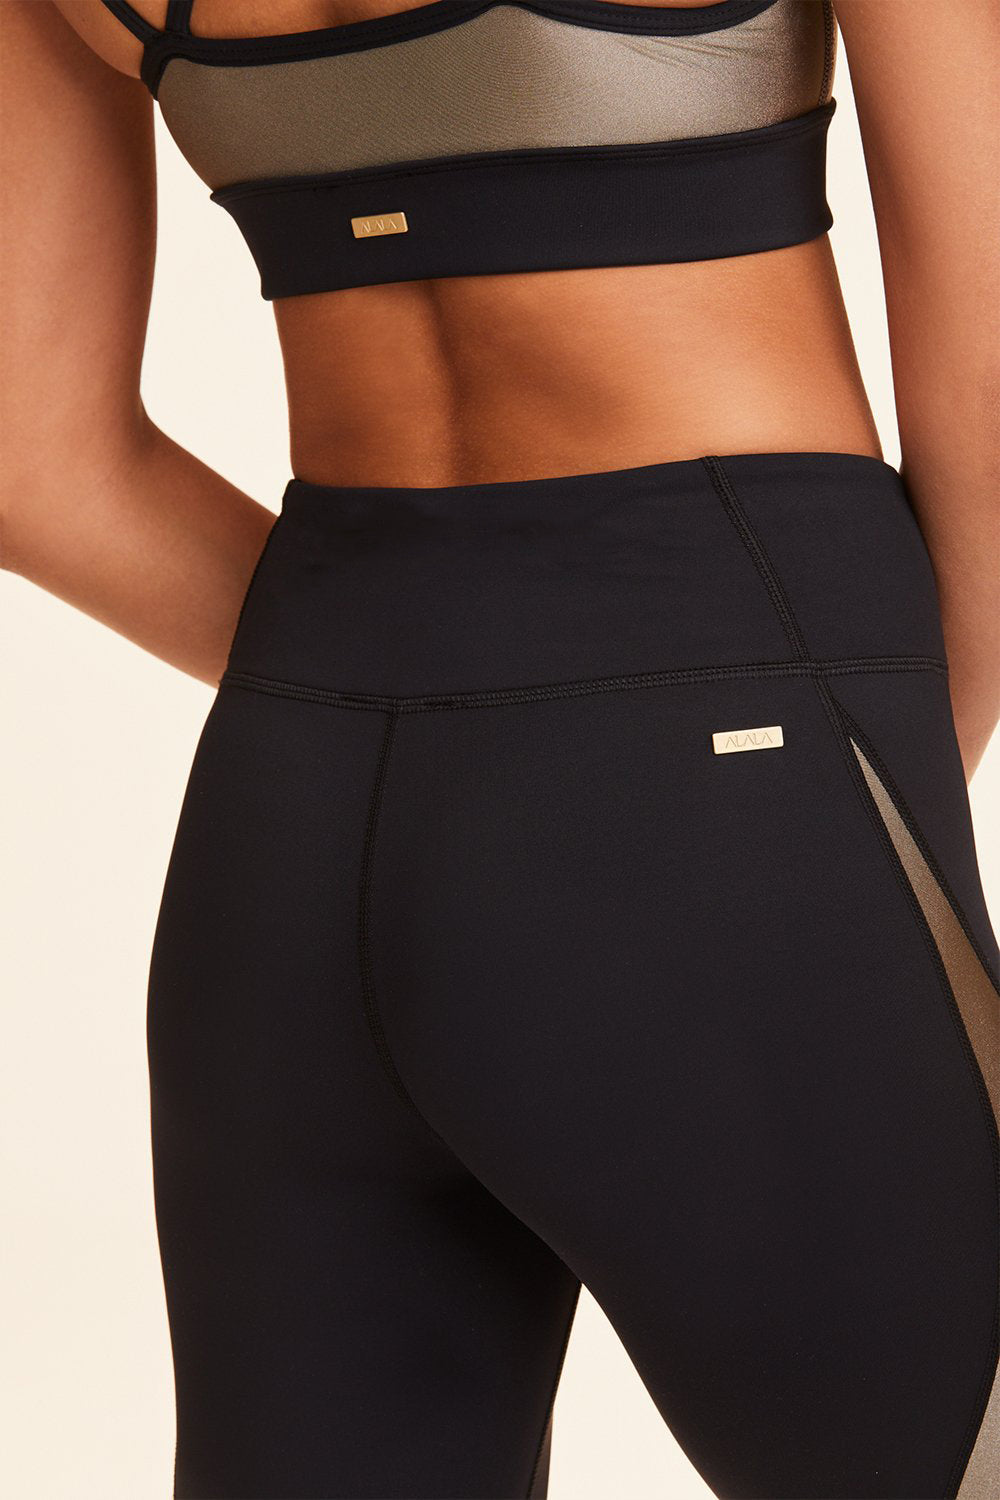 Close-up back view of Alala Women's Luxury Athleisure black, white, and gold color-blocked tight